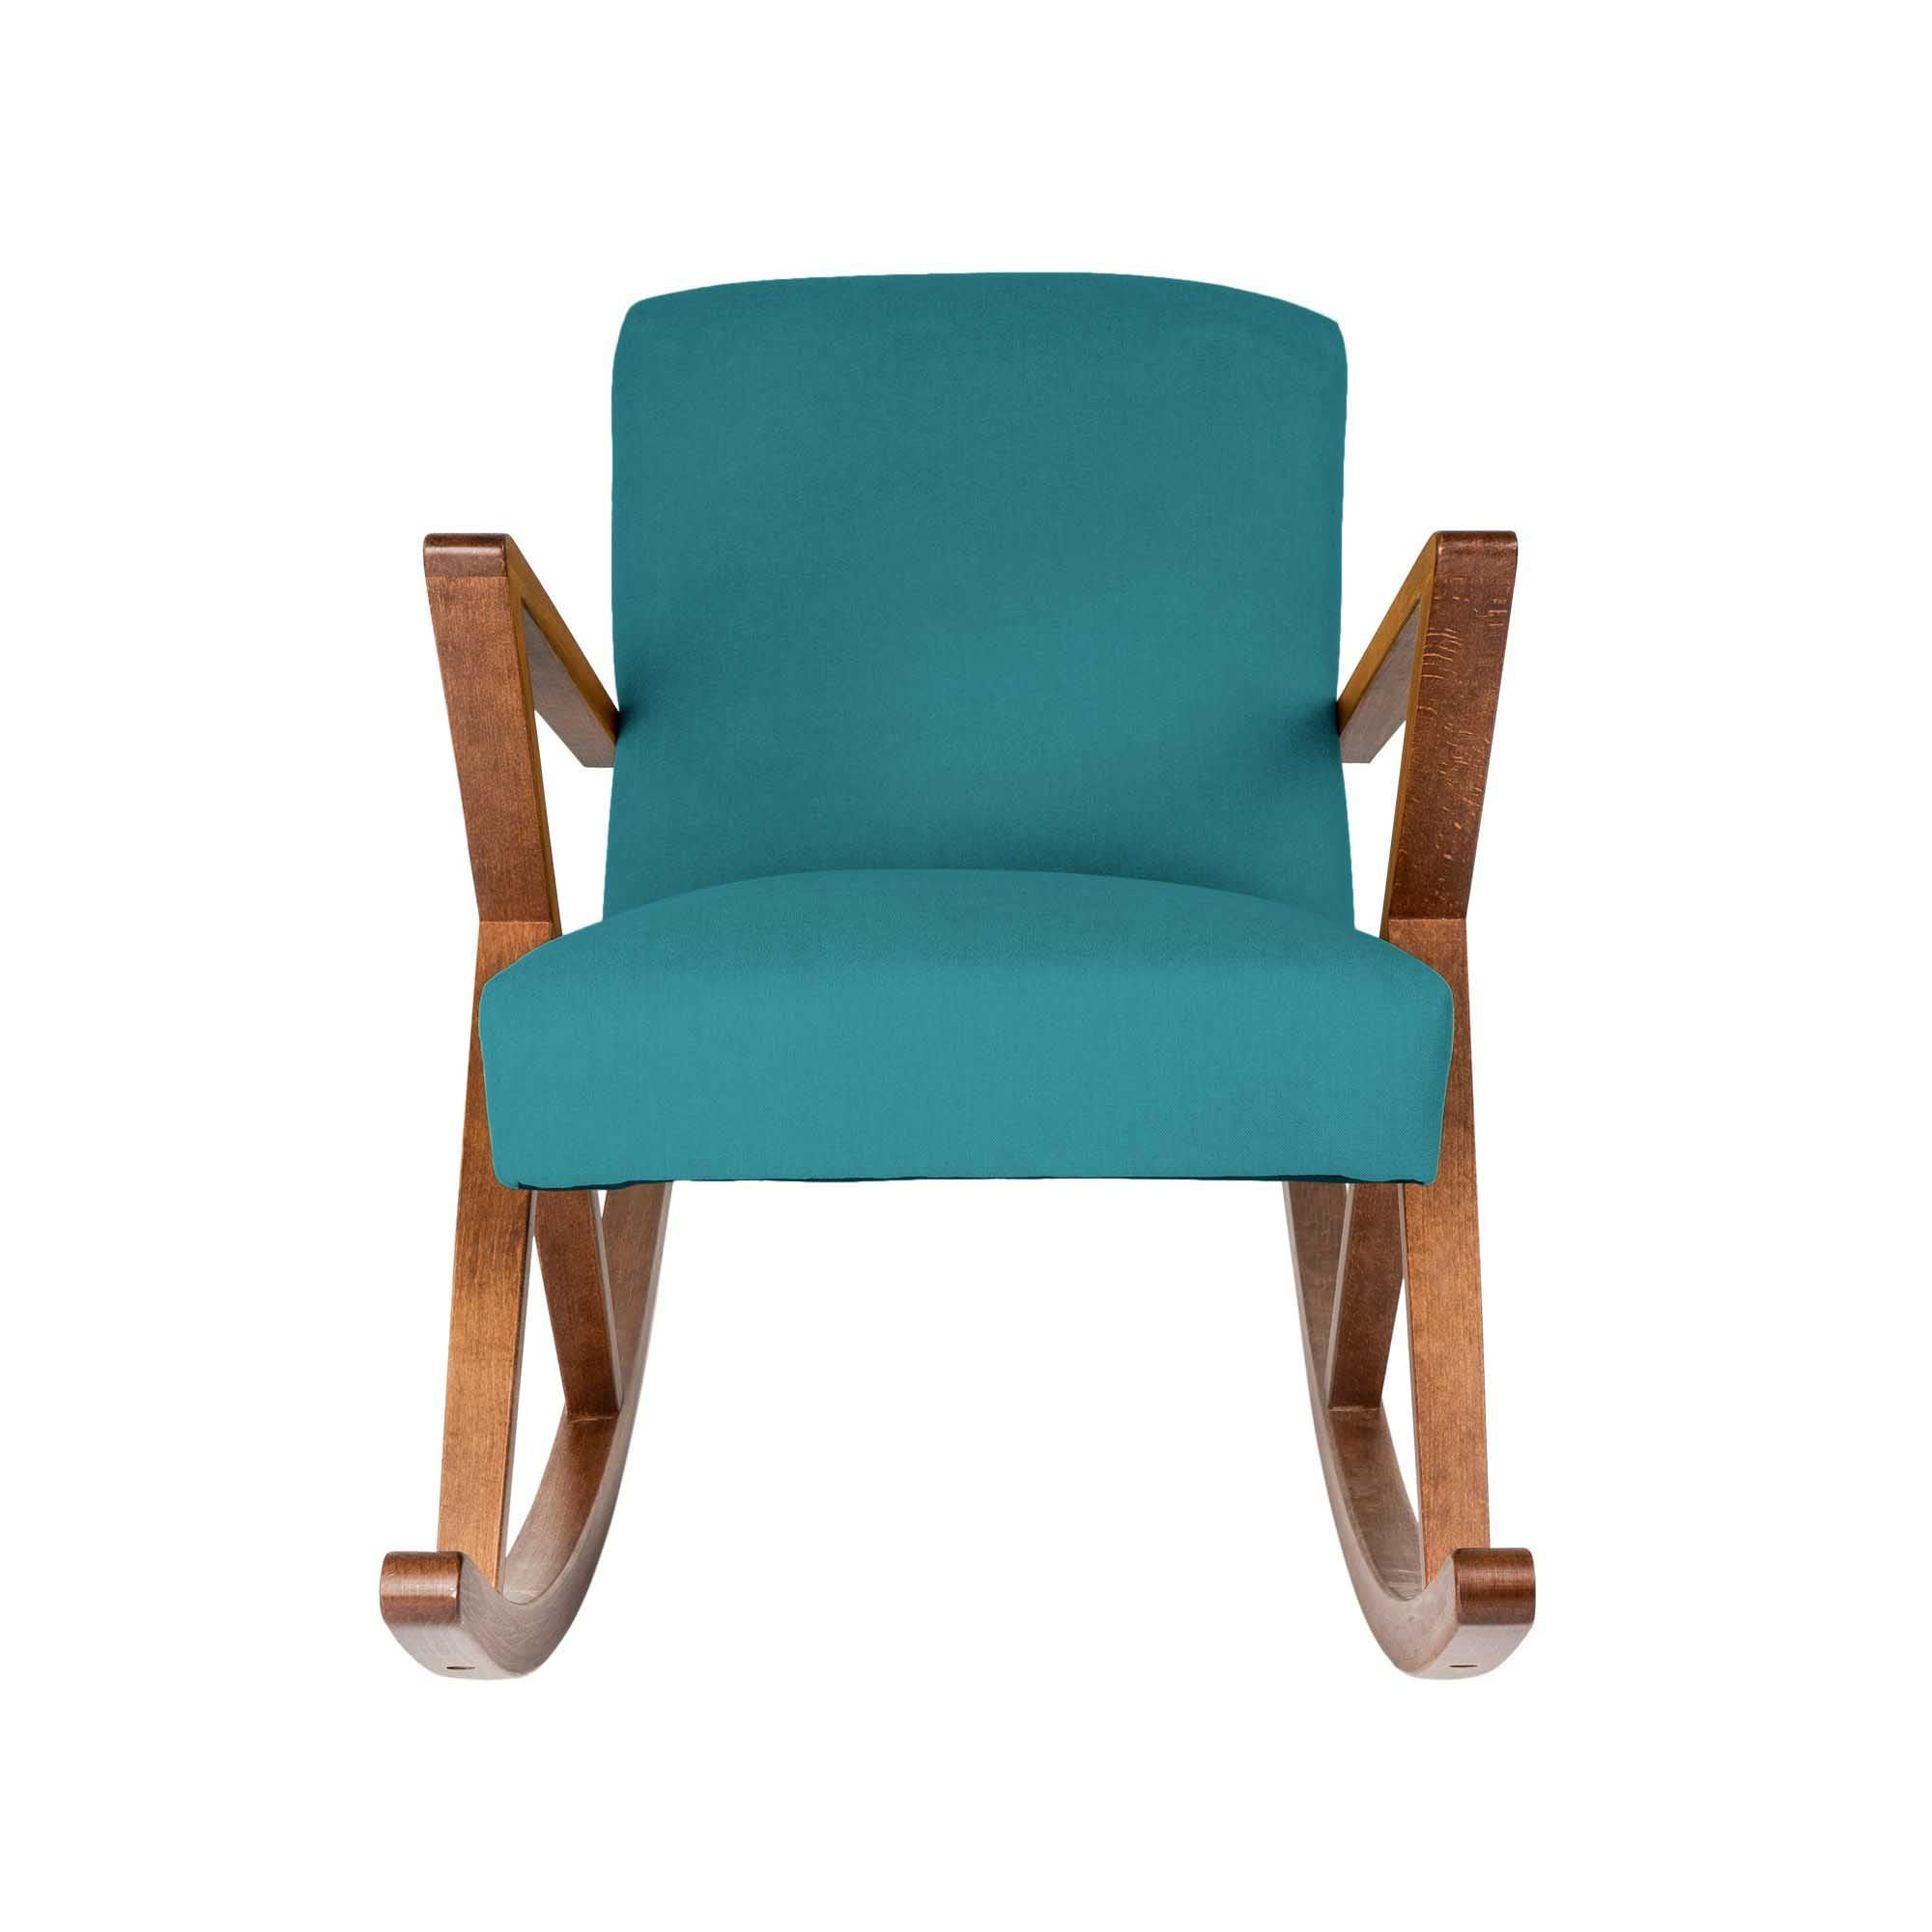  Rocking Chair, Beech Wood Frame, Walnut Colour blue fabric, front view